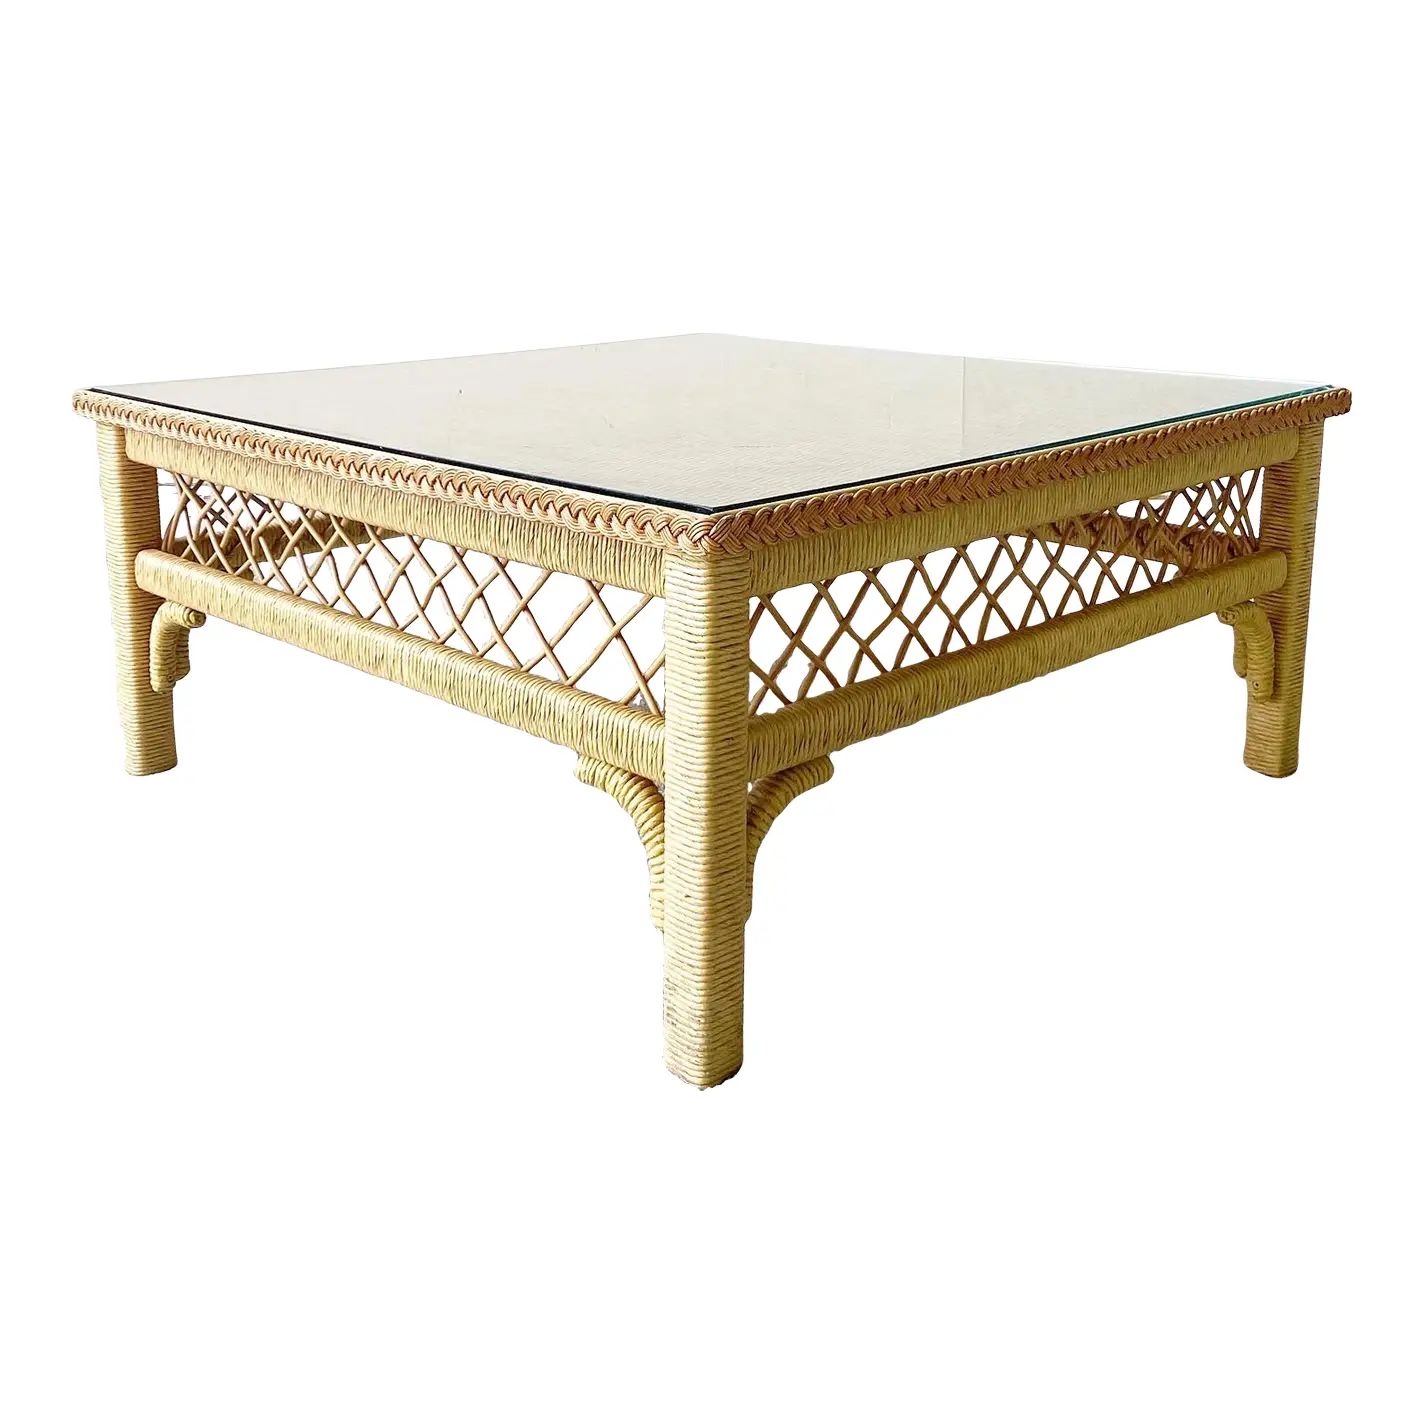 Boho Chic Wicker and Rattan Coffee Table With Glass Top by Henry Link | Chairish